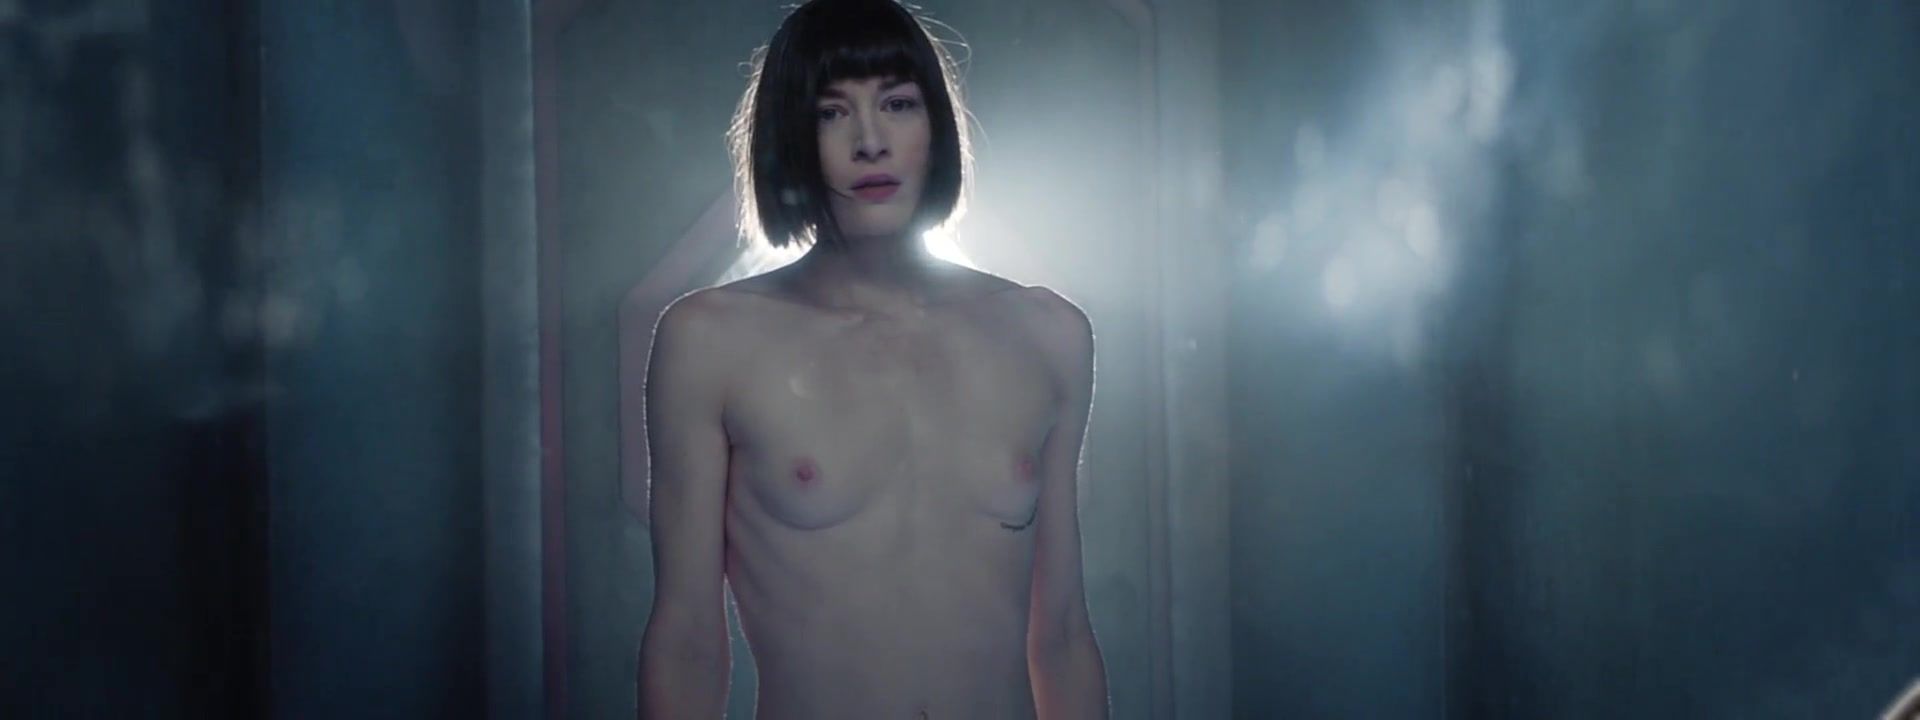 Web Stoya nude - A.I. Rising (2018) Chacal